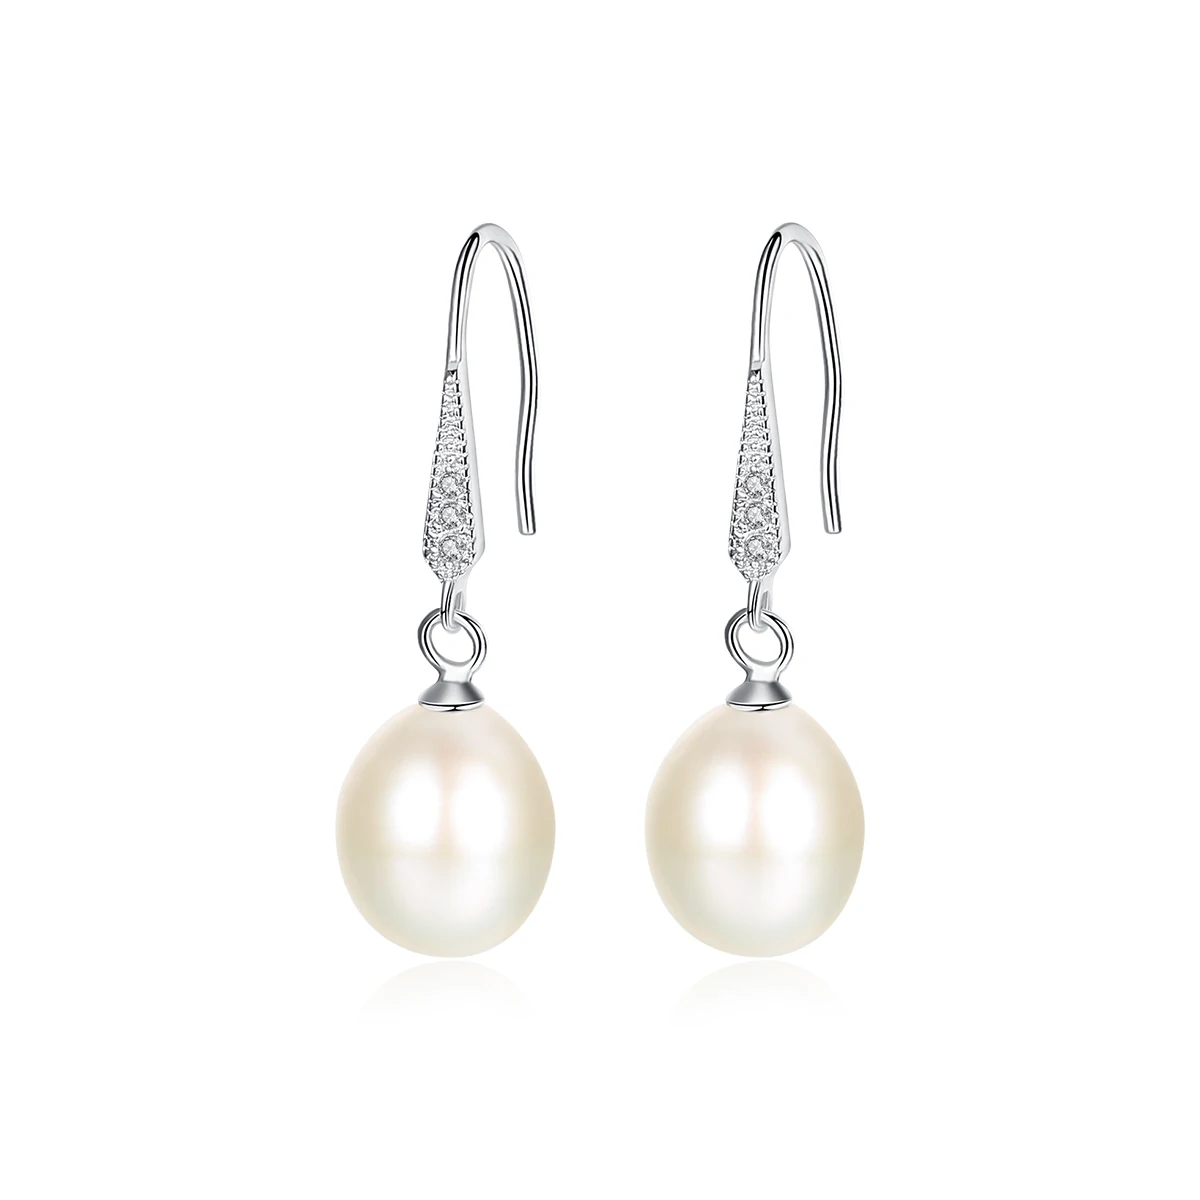 

CZCITY High Quality 925 Sterling Silver Jewelry Natural Freshwater Pearl Earrings Hooks Dangle Drop Earing